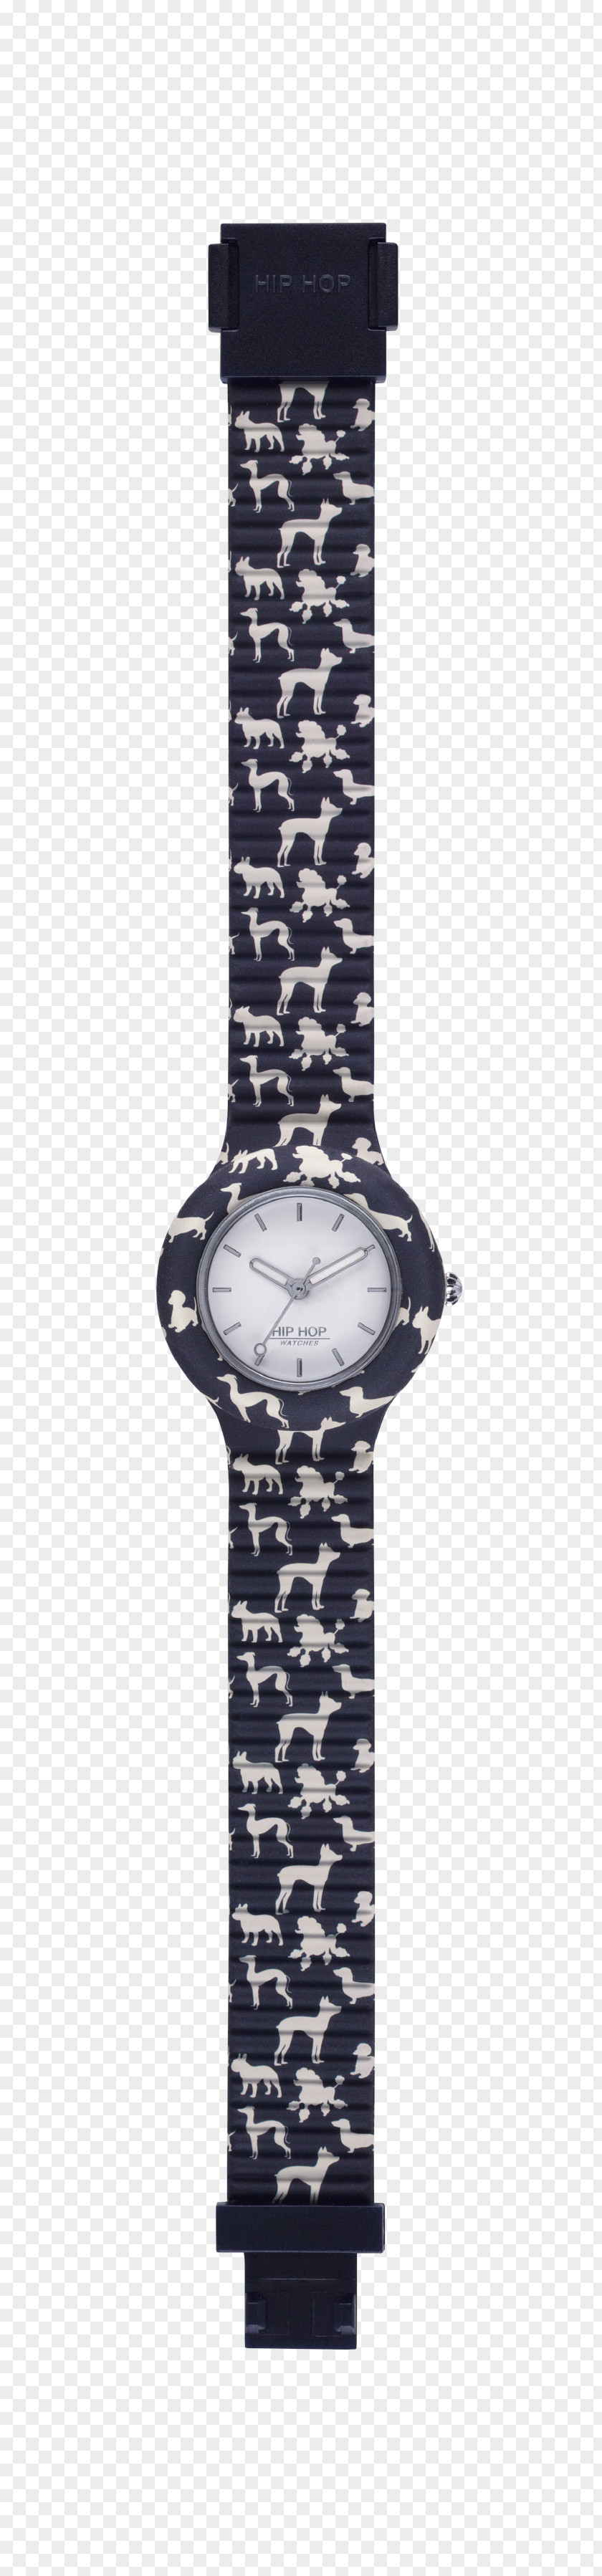 Hip Hop Background Maiocchi Gioielleria L'Orologio Watch PNG